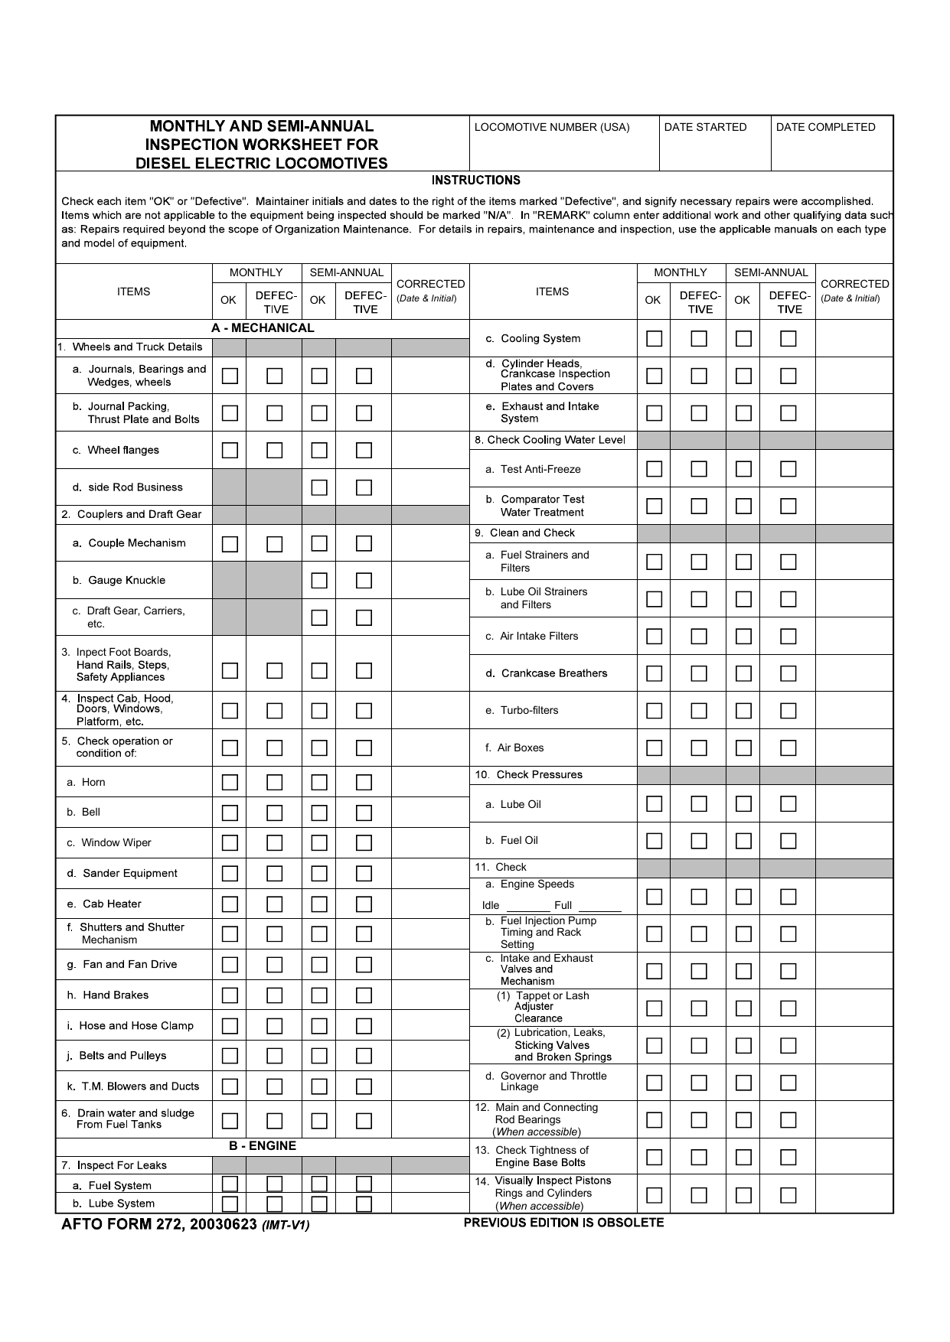 AFTO Form 272 Monthly and Semi-annual Inspection Worksheet for Diesel Electronic Locomotive (LRA), Page 1